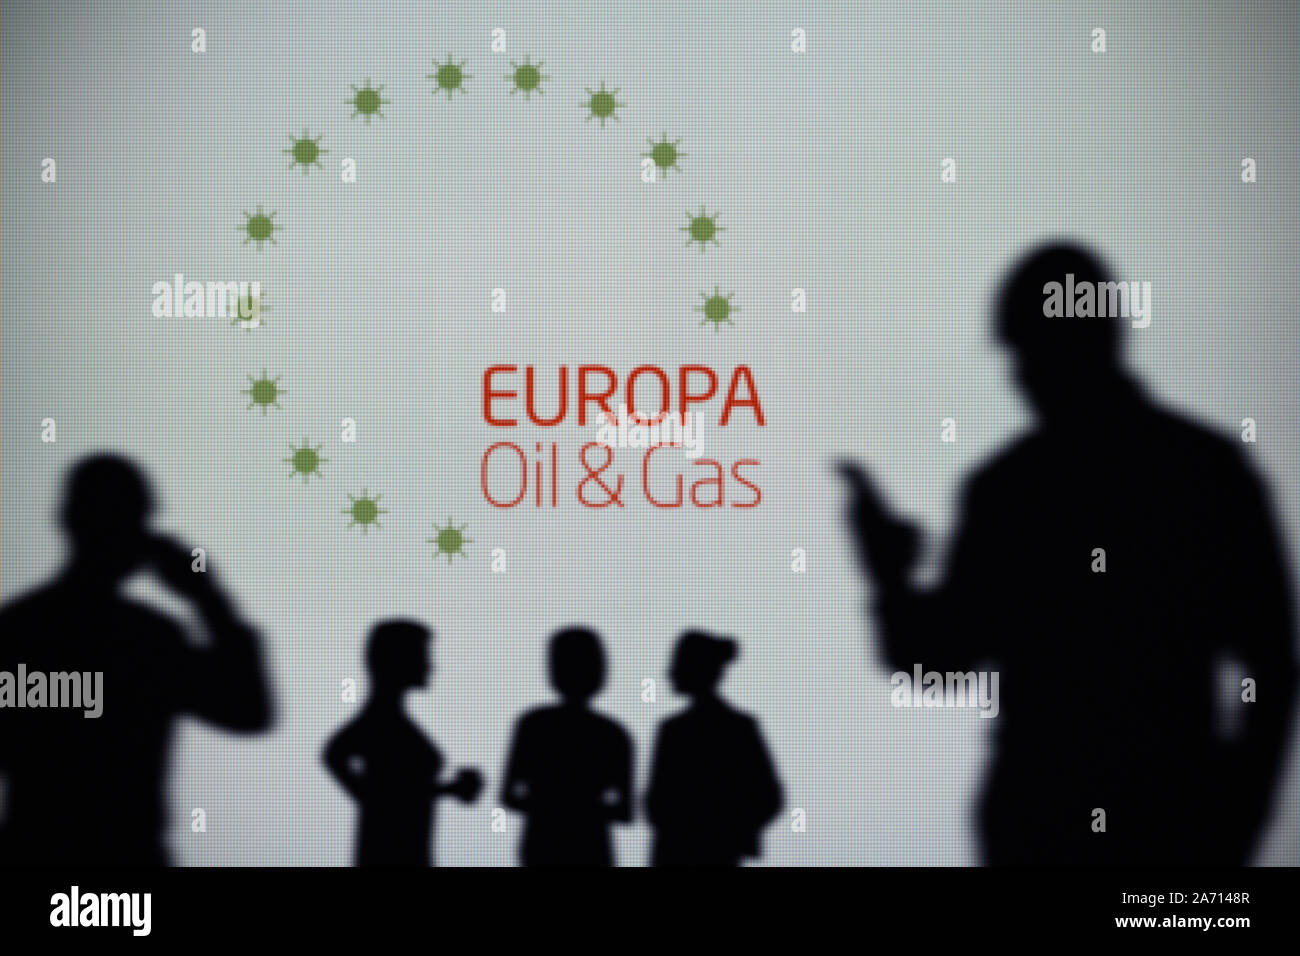 The Europa Oil & Gas logo is seen on an LED screen in the background while a silhouetted person uses a smartphone (Editorial use only) Stock Photo